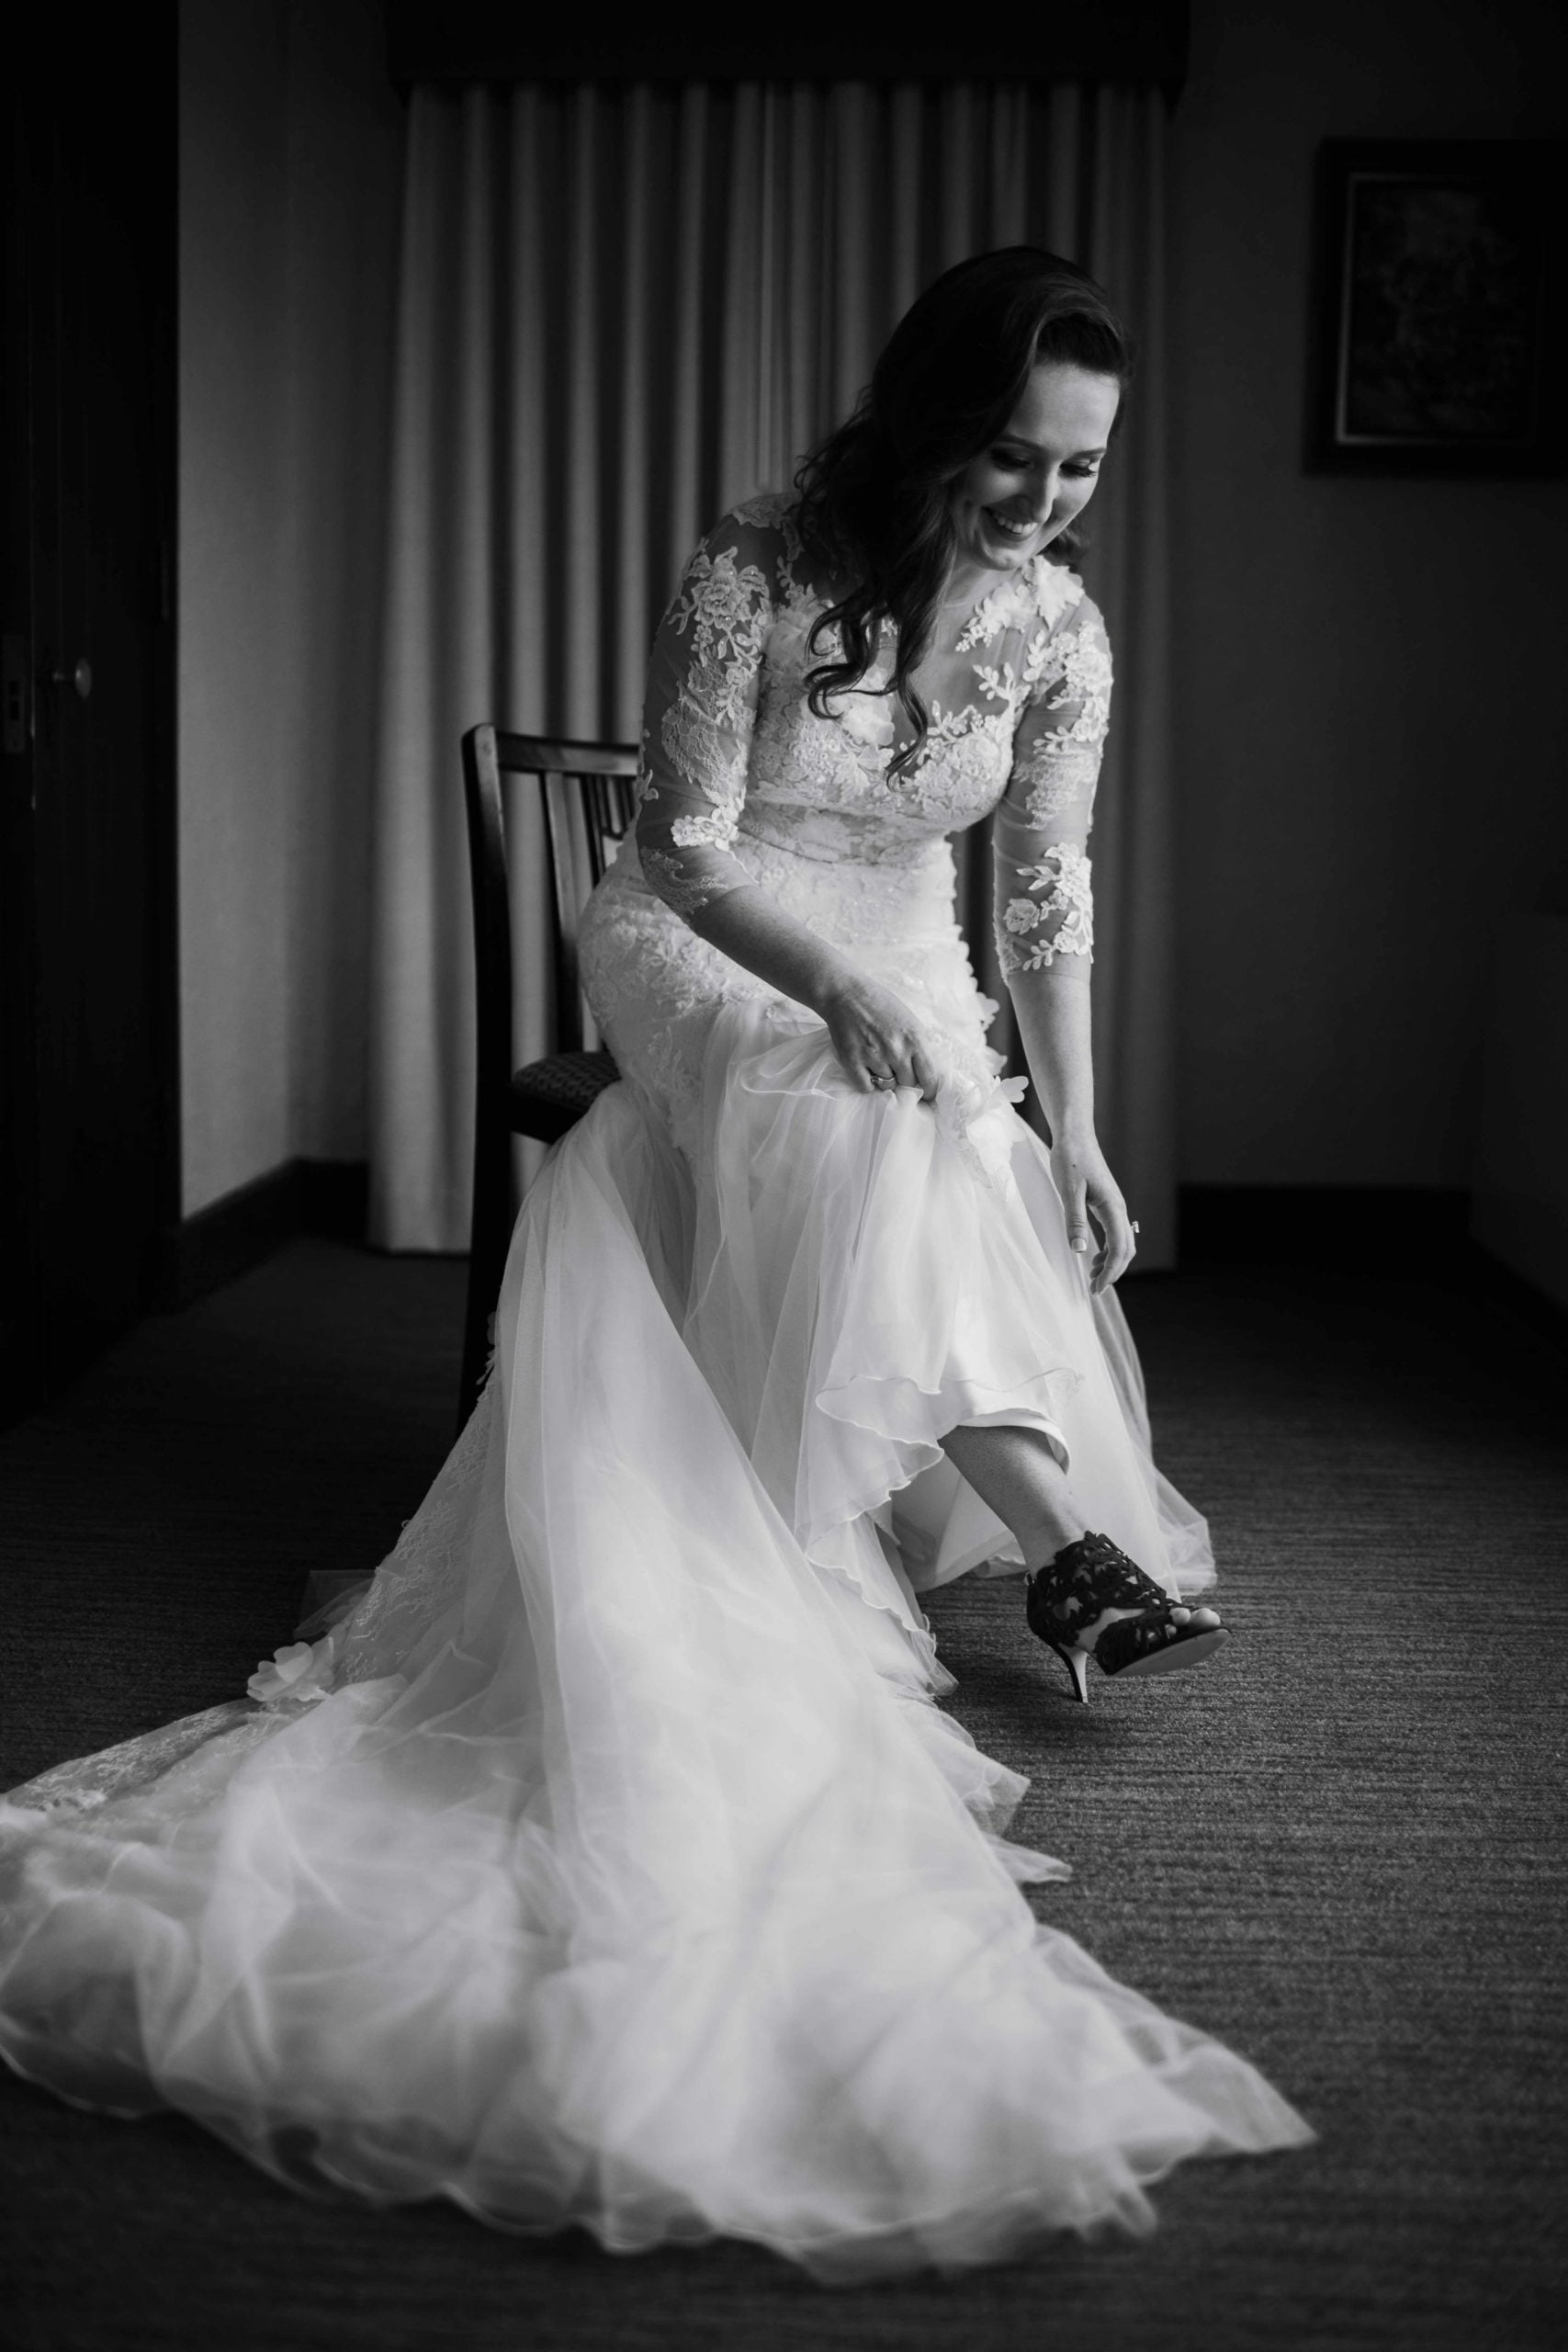 Hotel Baker Winter Wedding Photography Saint Charles Illinois Bride Getting Ready Black and White